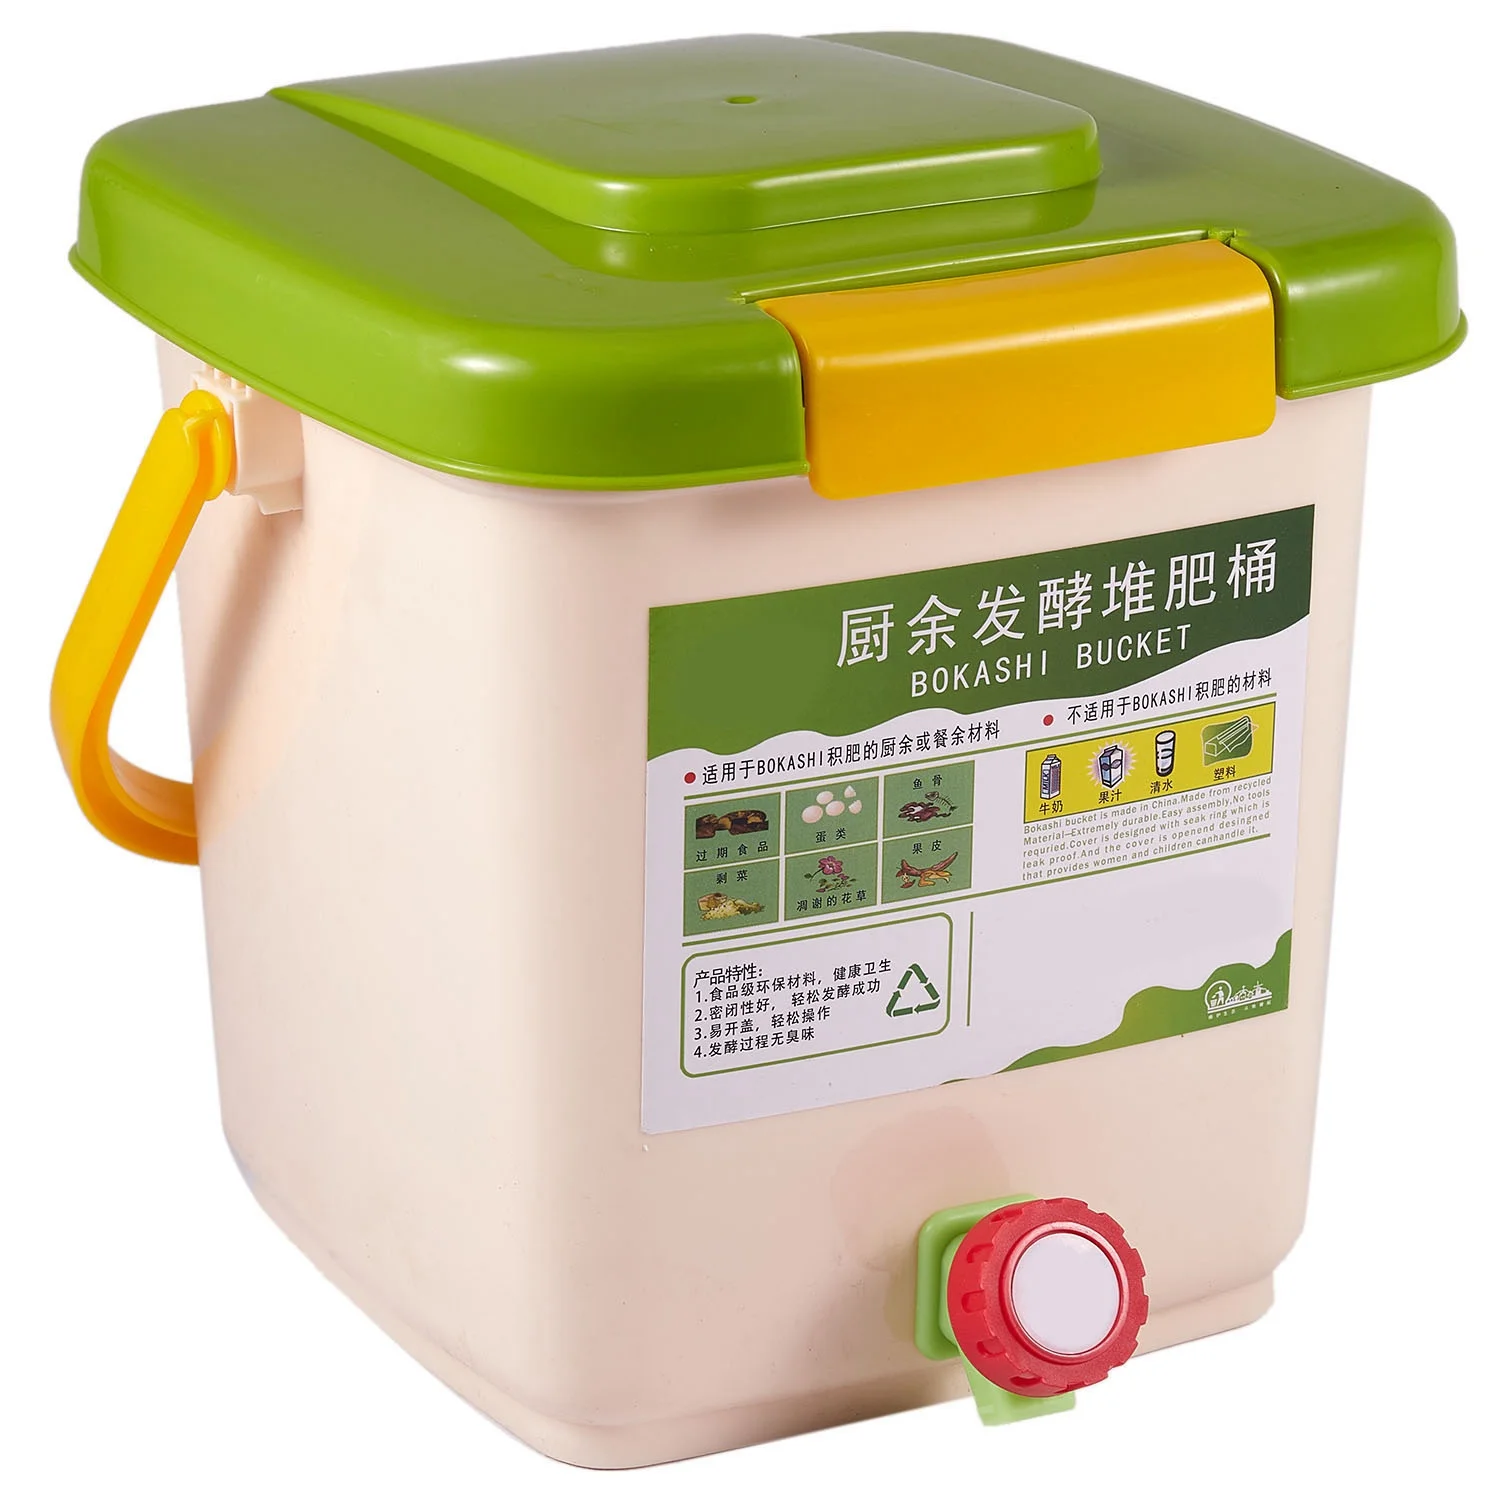 

12L Compost Bin Recycle Composter Aerated Compost Bin PP Organic Homemade Trash Can Bucket Kitchen Garden Food Waste Bins